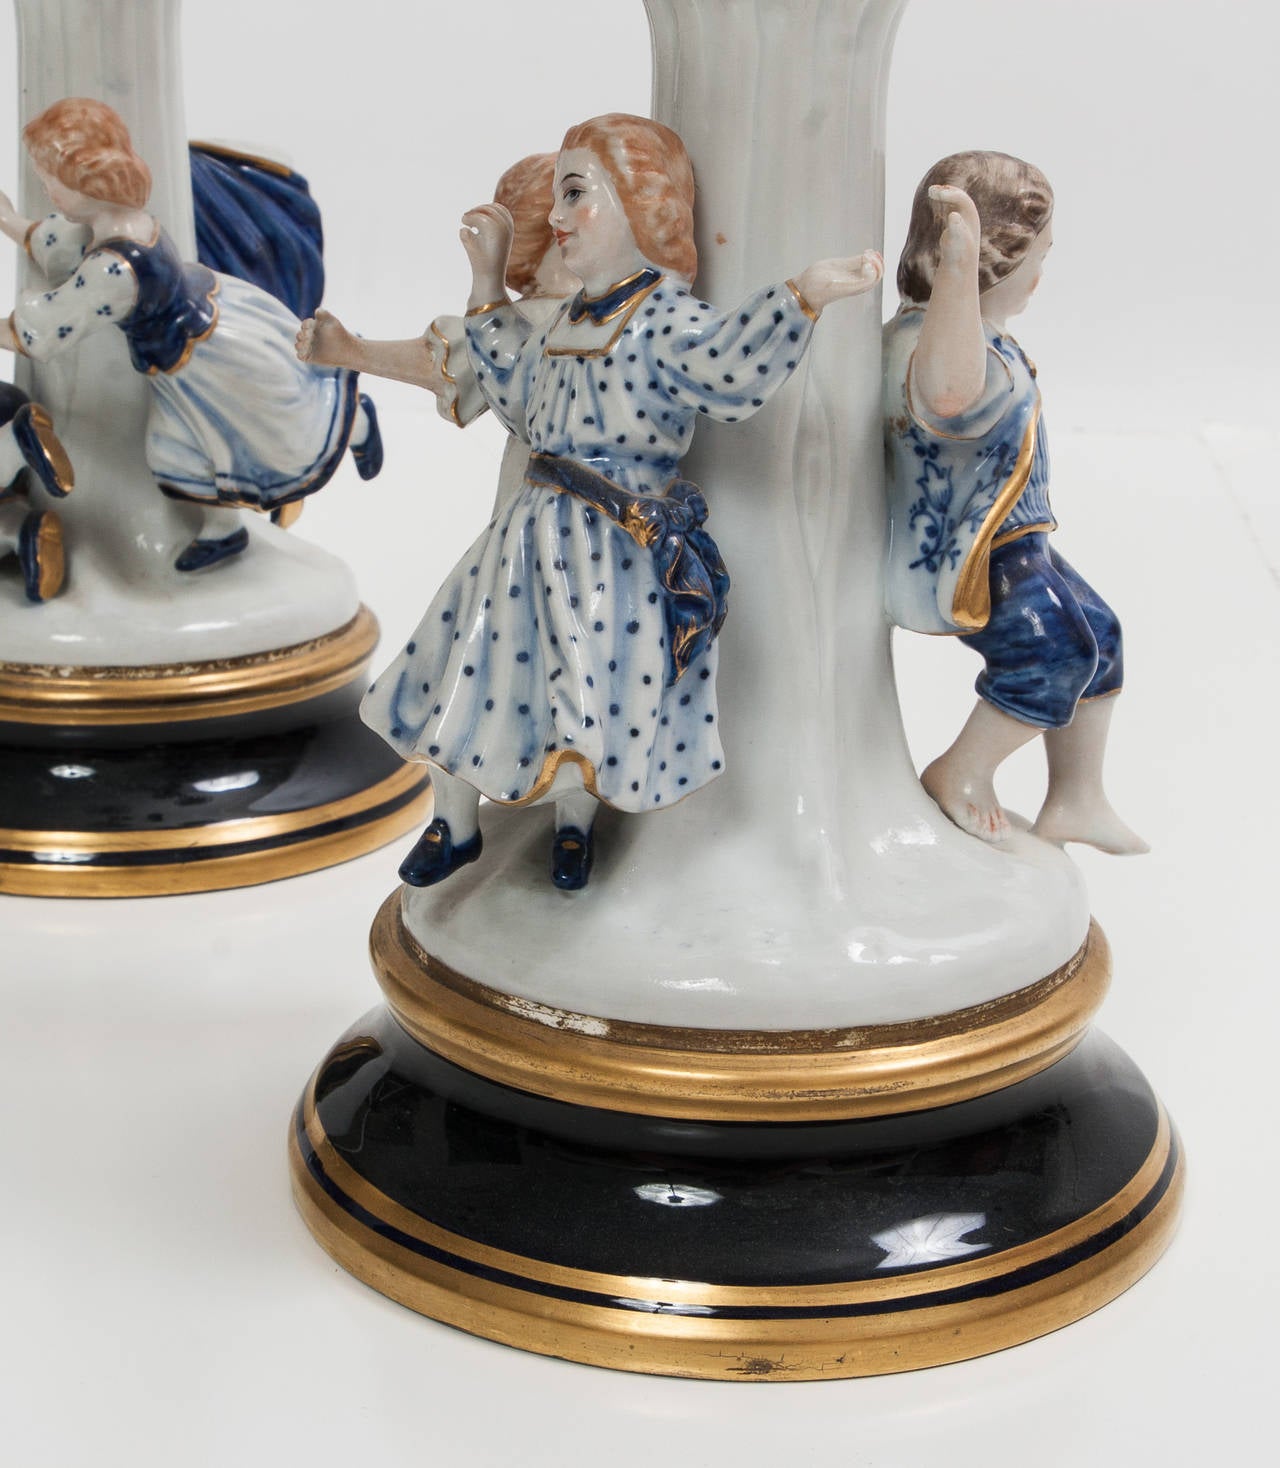 Italian candelabras with blue and white with figures of children at base.